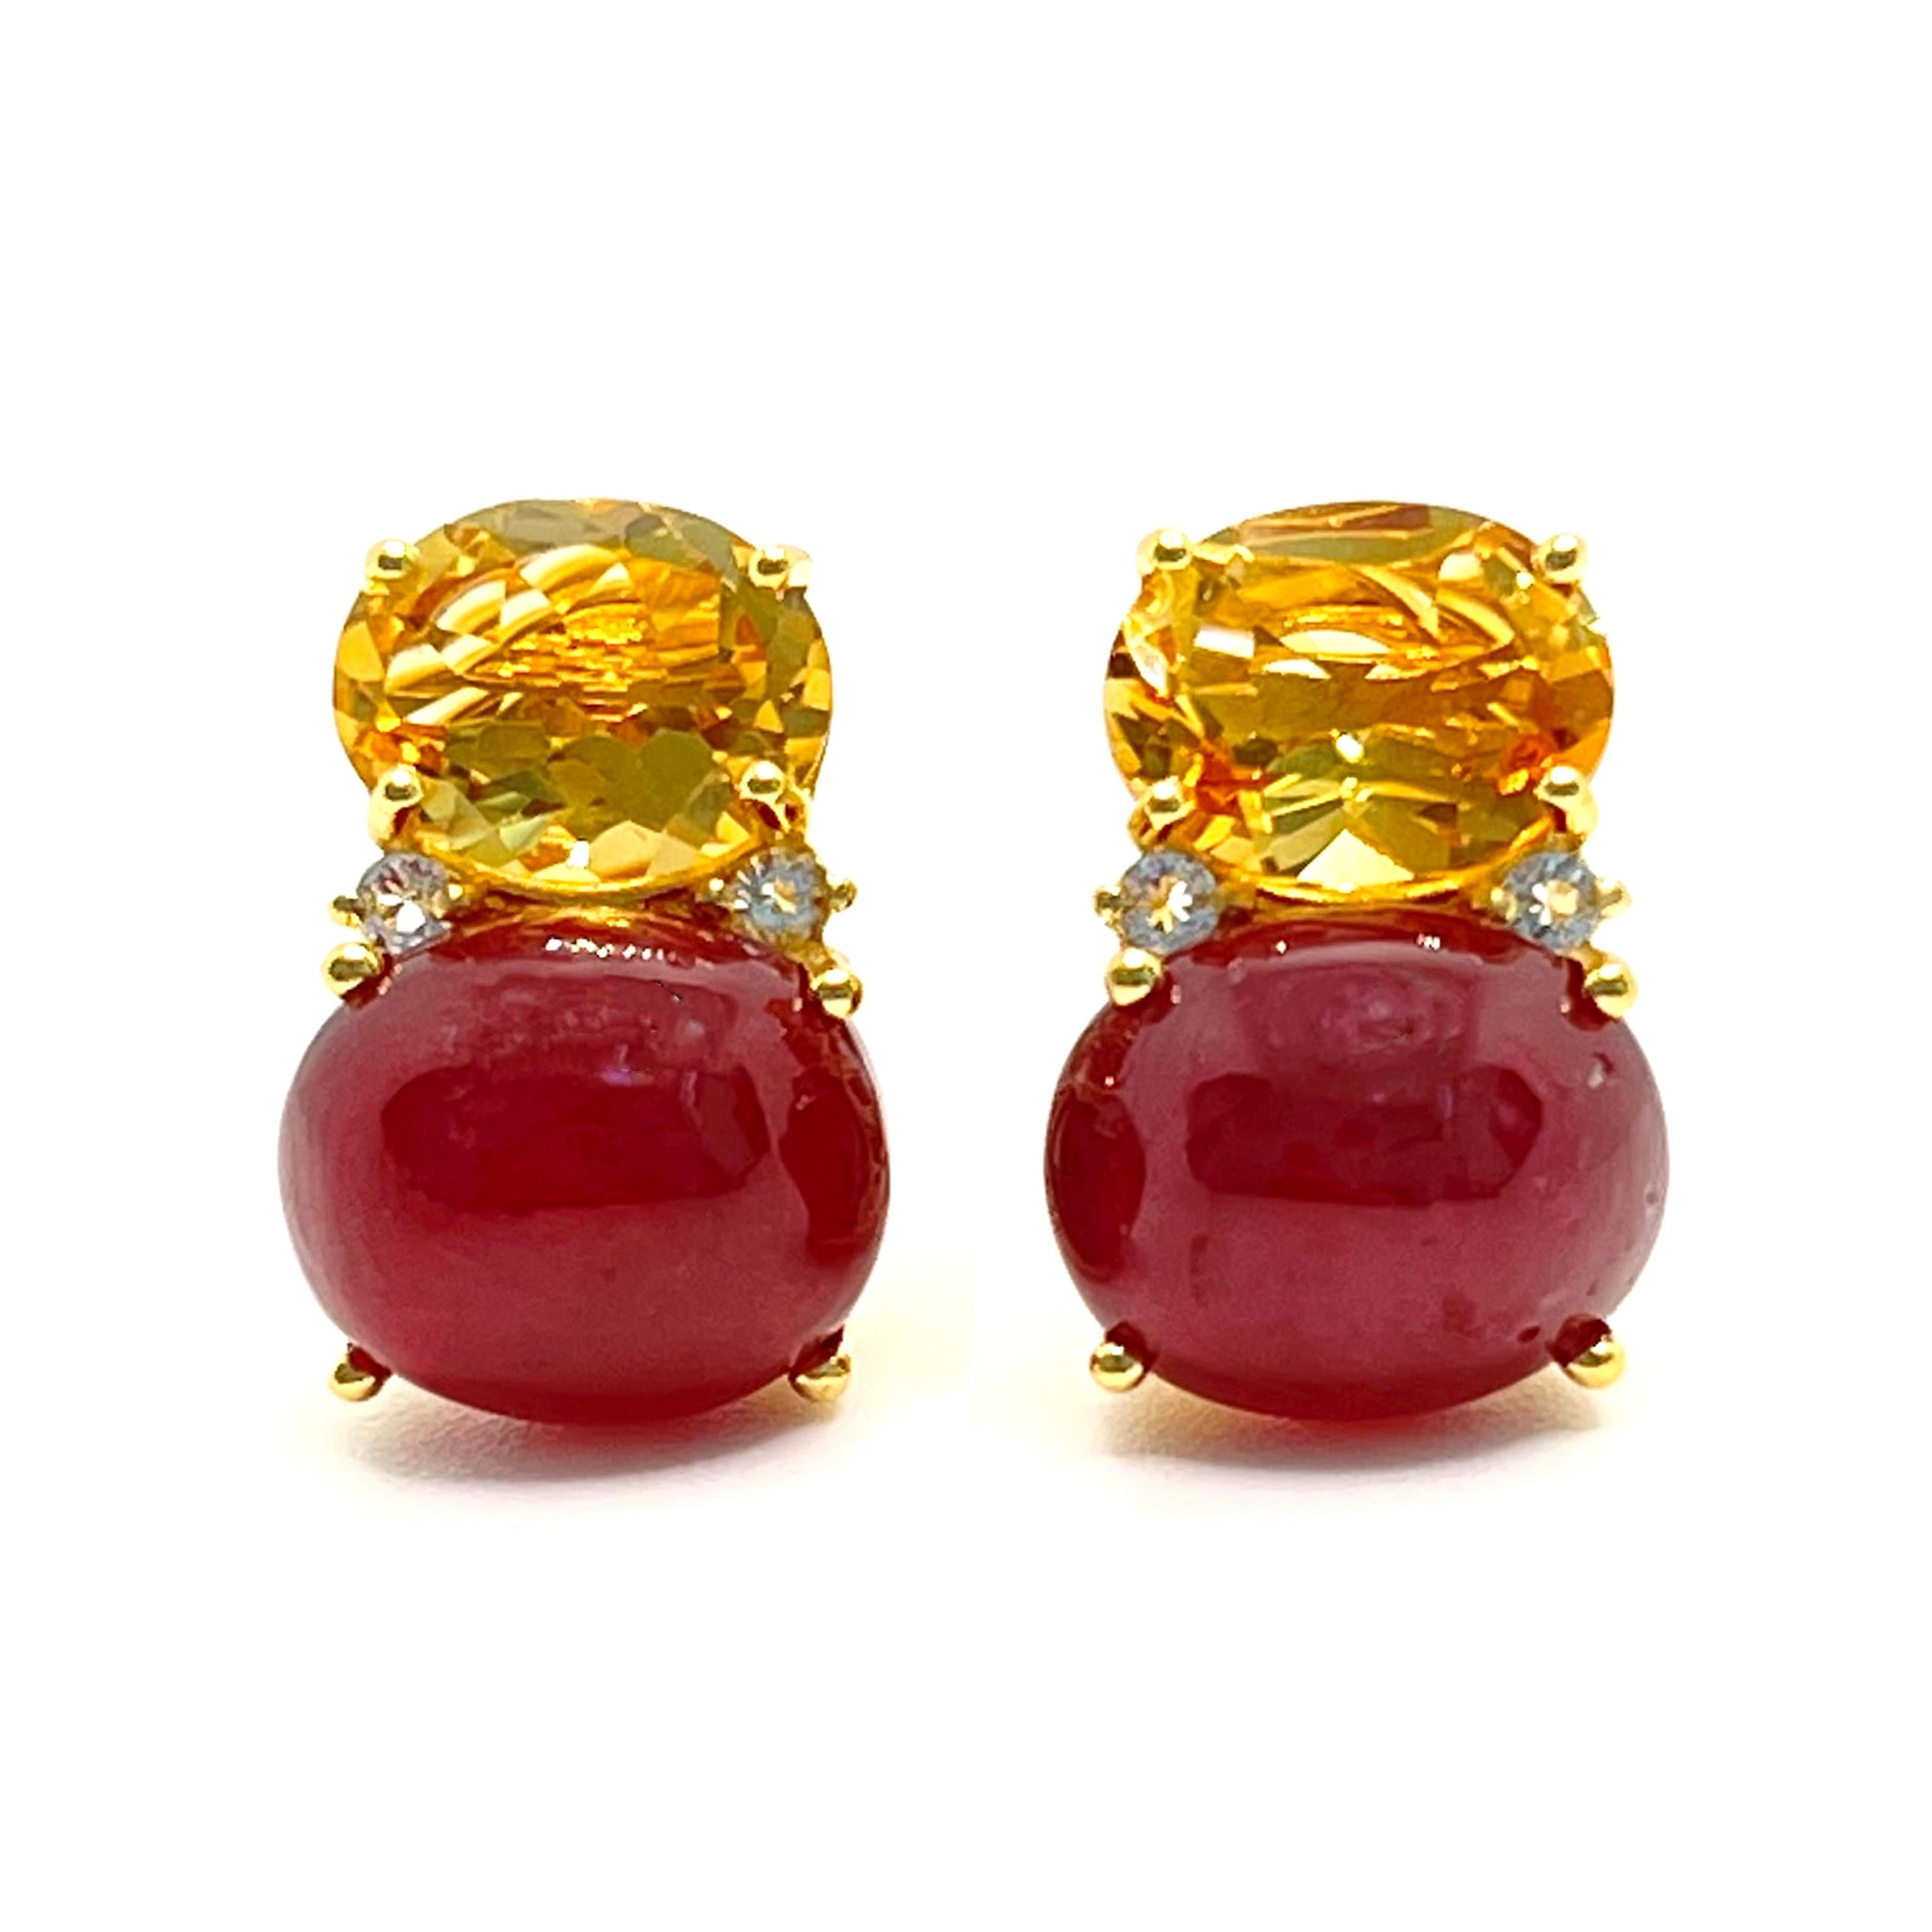 These stunning pair of earrings features a pair of genuine oval citrine, genuine cabochon-cut African ruby, adorned with round white topaz on the side, handset in 18k yellow gold vermeil over sterling silver. The beautiful yellow/pink-ish red